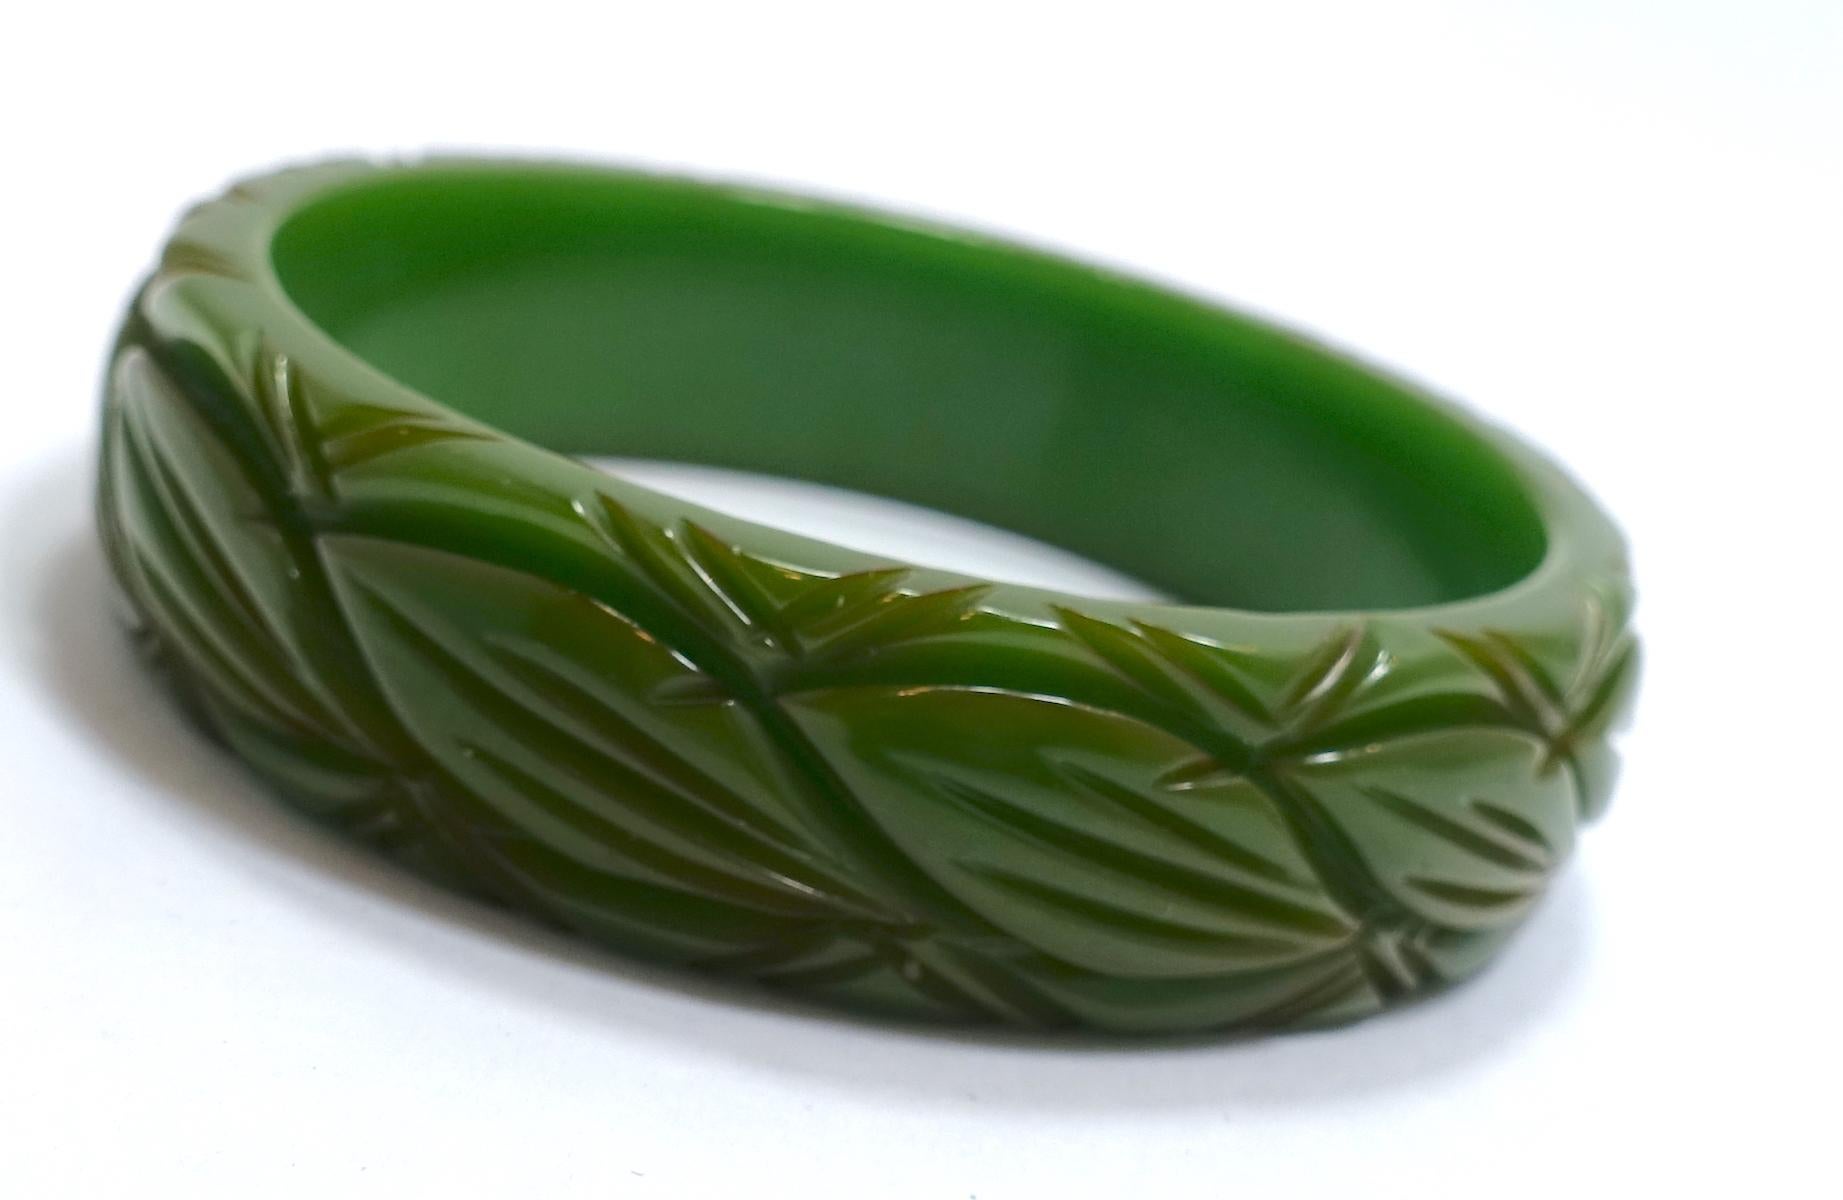 This vintage Bakelite bangle bracelet from the 30s features heavily carved green leaves.  This bracelet measures 8” x 3/4” and is in excellent condition.